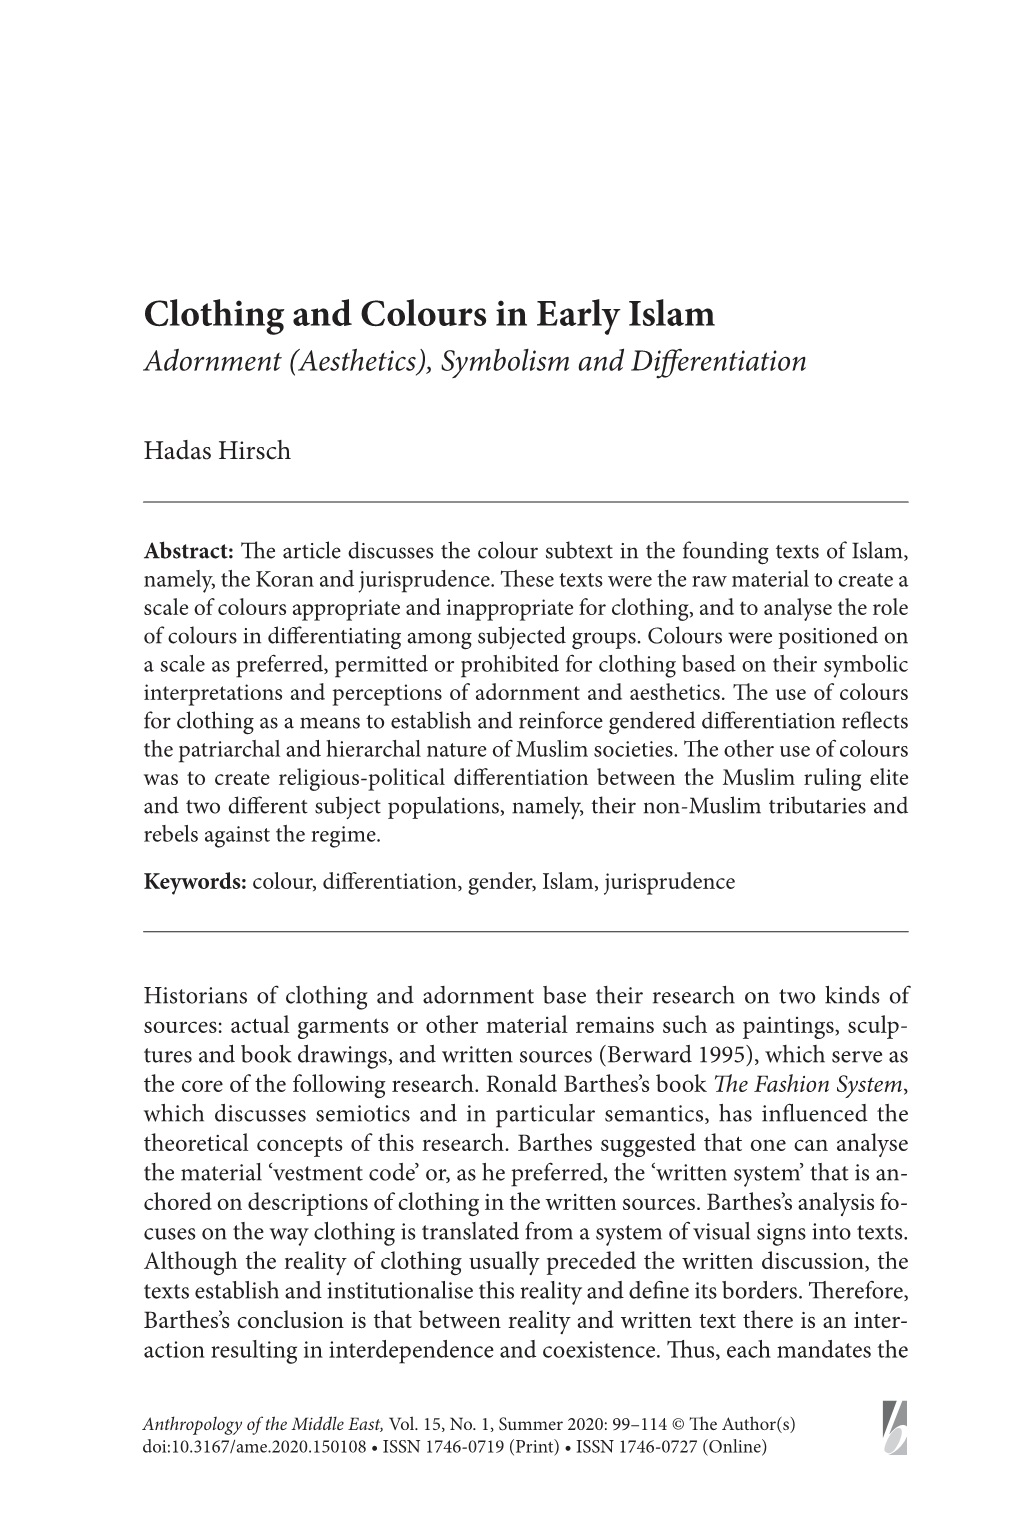 Clothing and Colours in Early Islam Adornment (Aesthetics), Symbolism and Differentiation